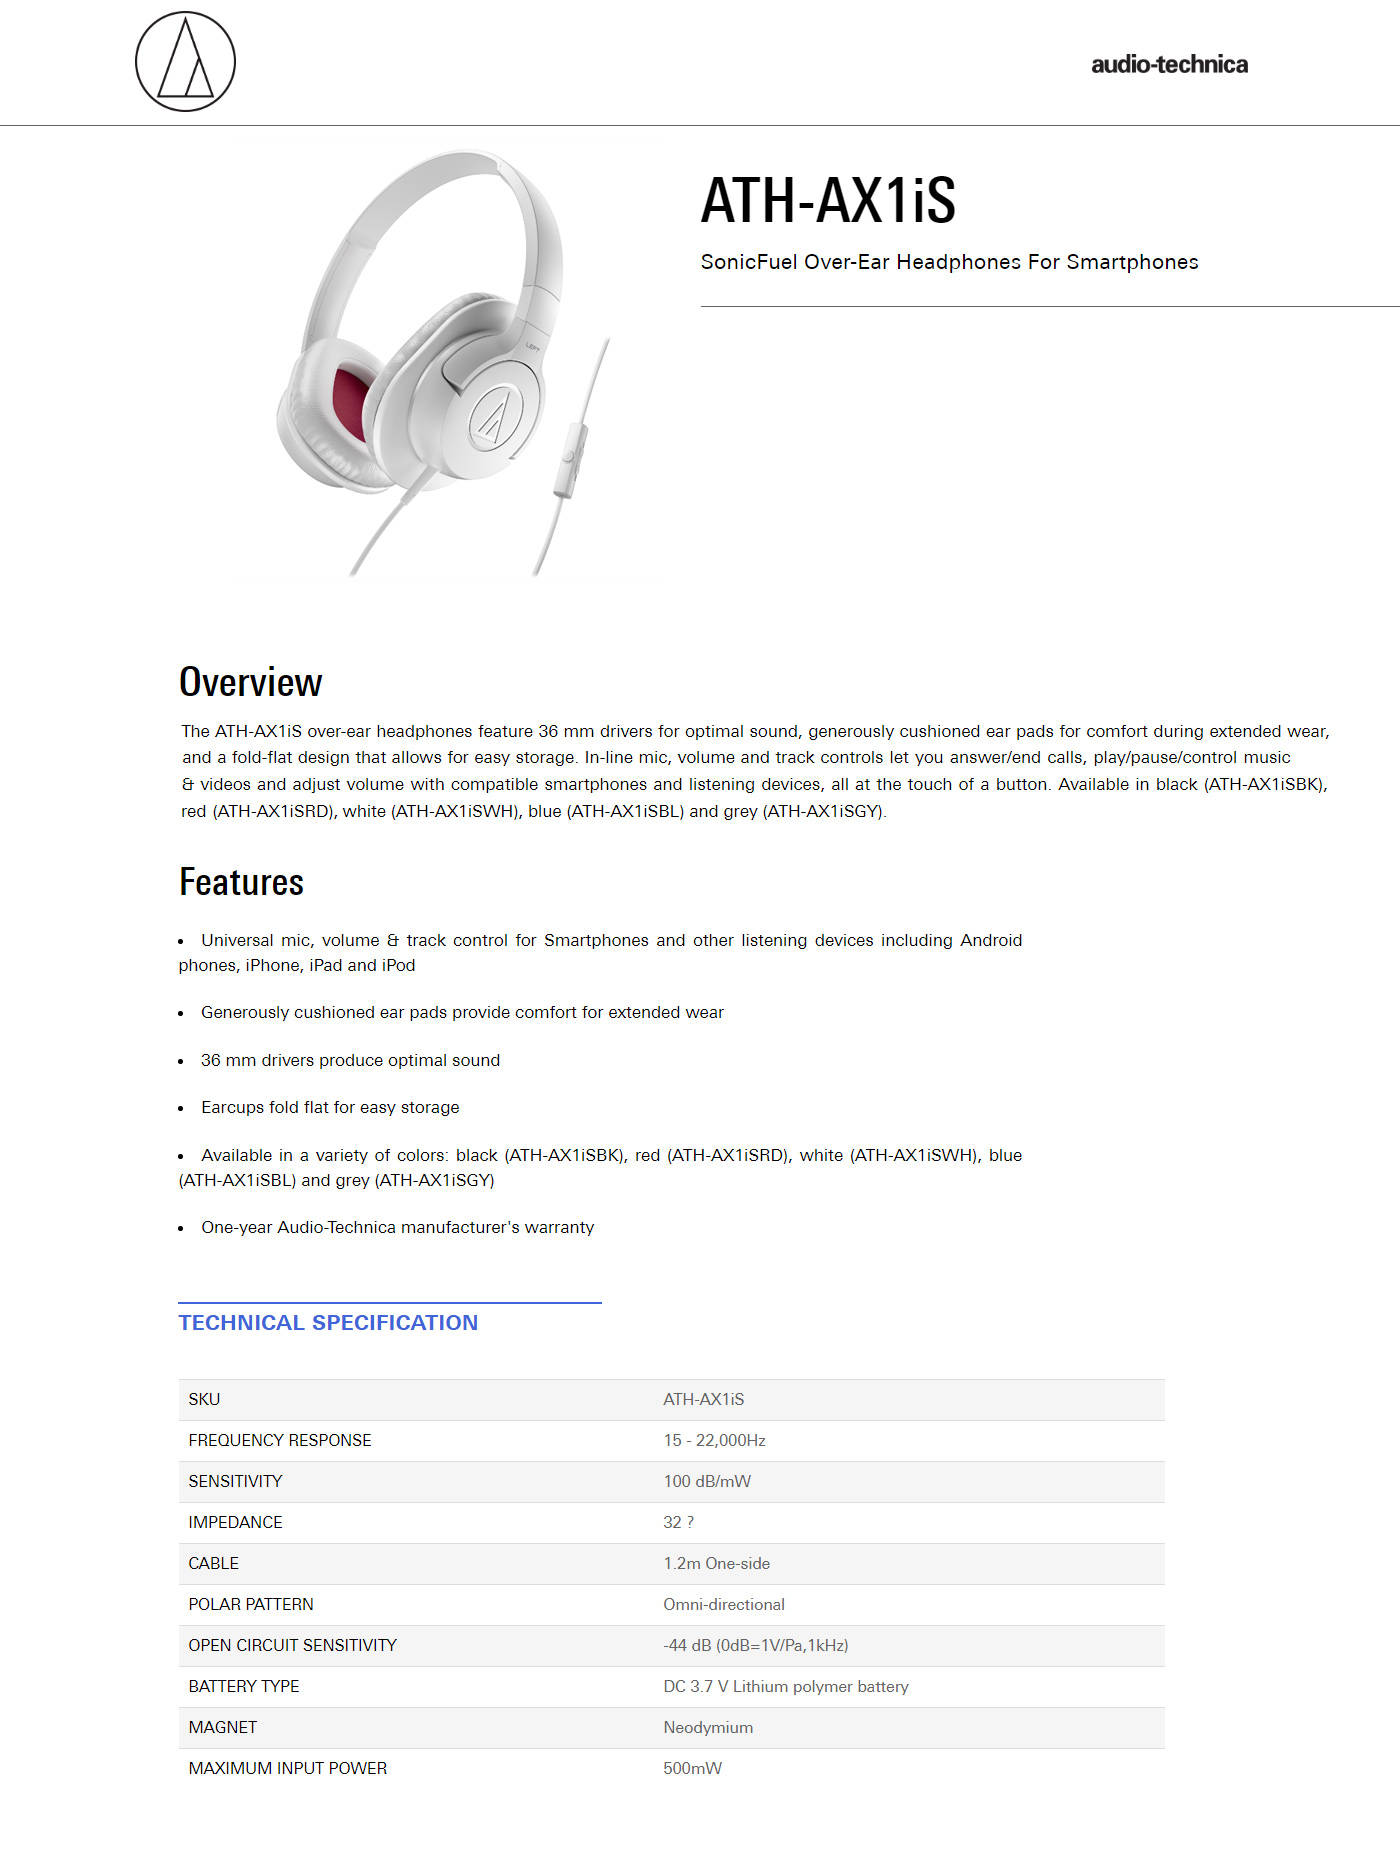 Buy Online Audio Technica ATH-AX1IS-WH SonicFuel Over-ear Headphones - White